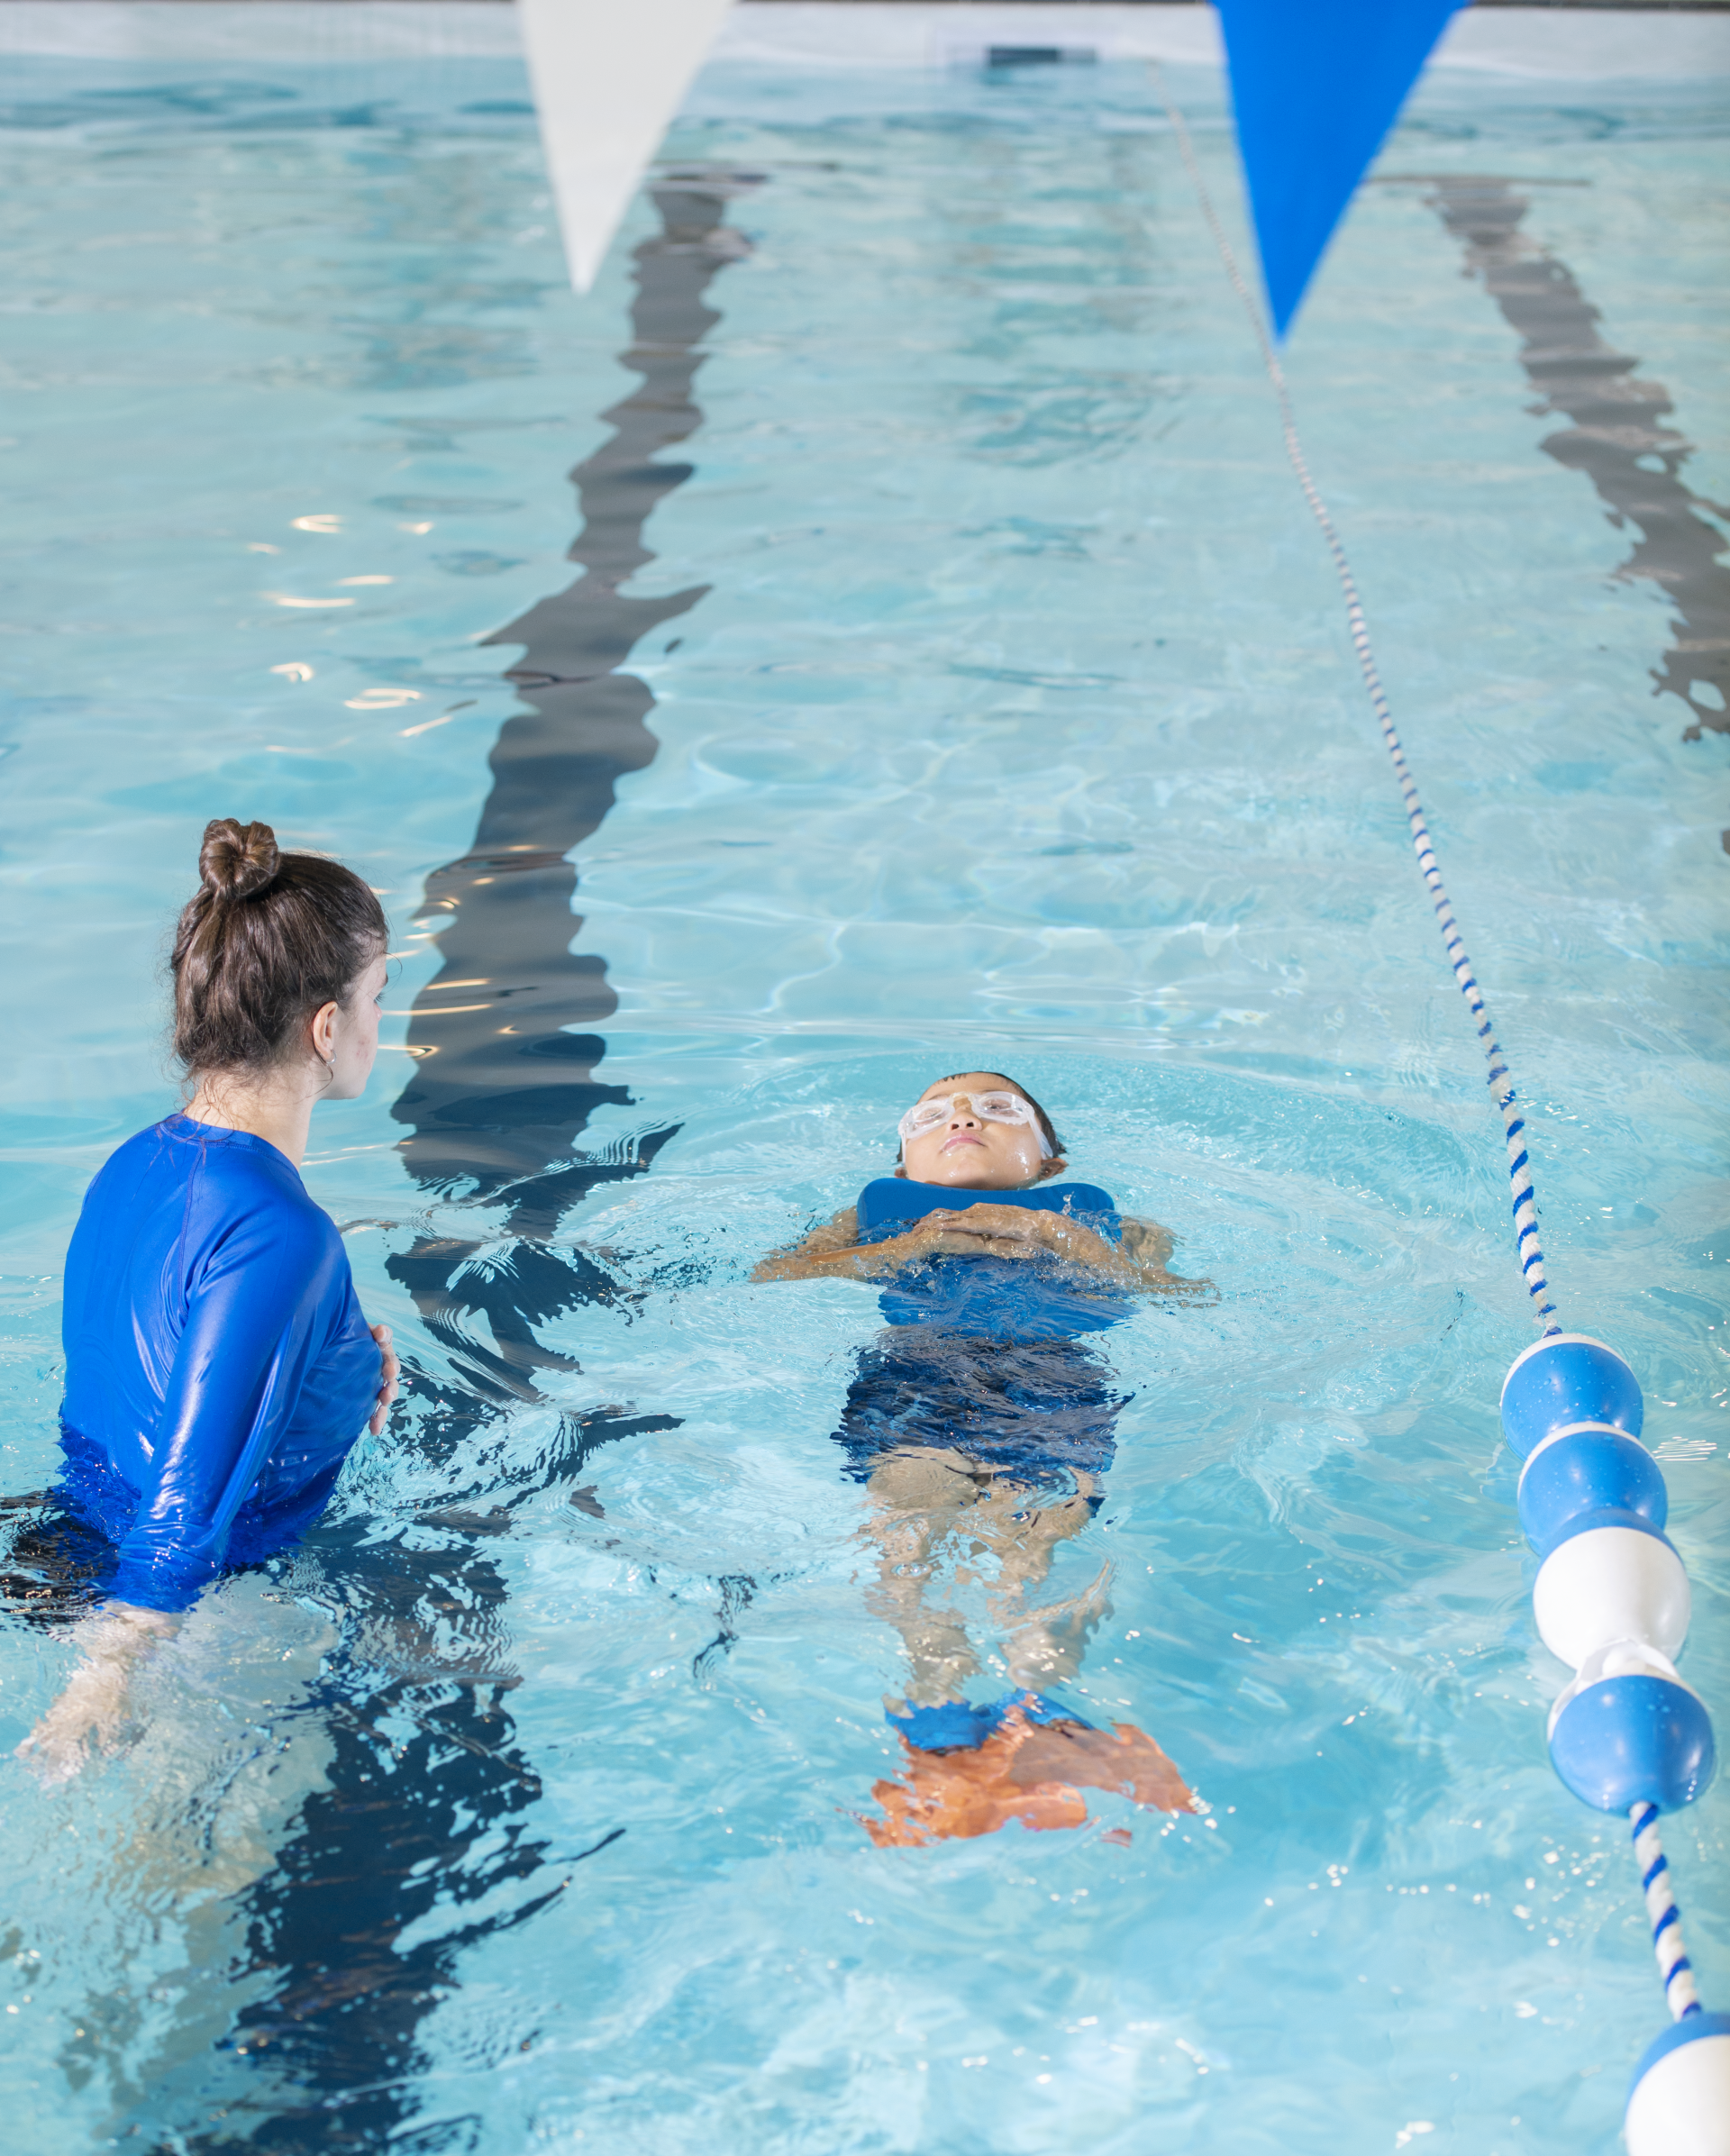 A woman is teaching a child how to swim in a swimming pool.